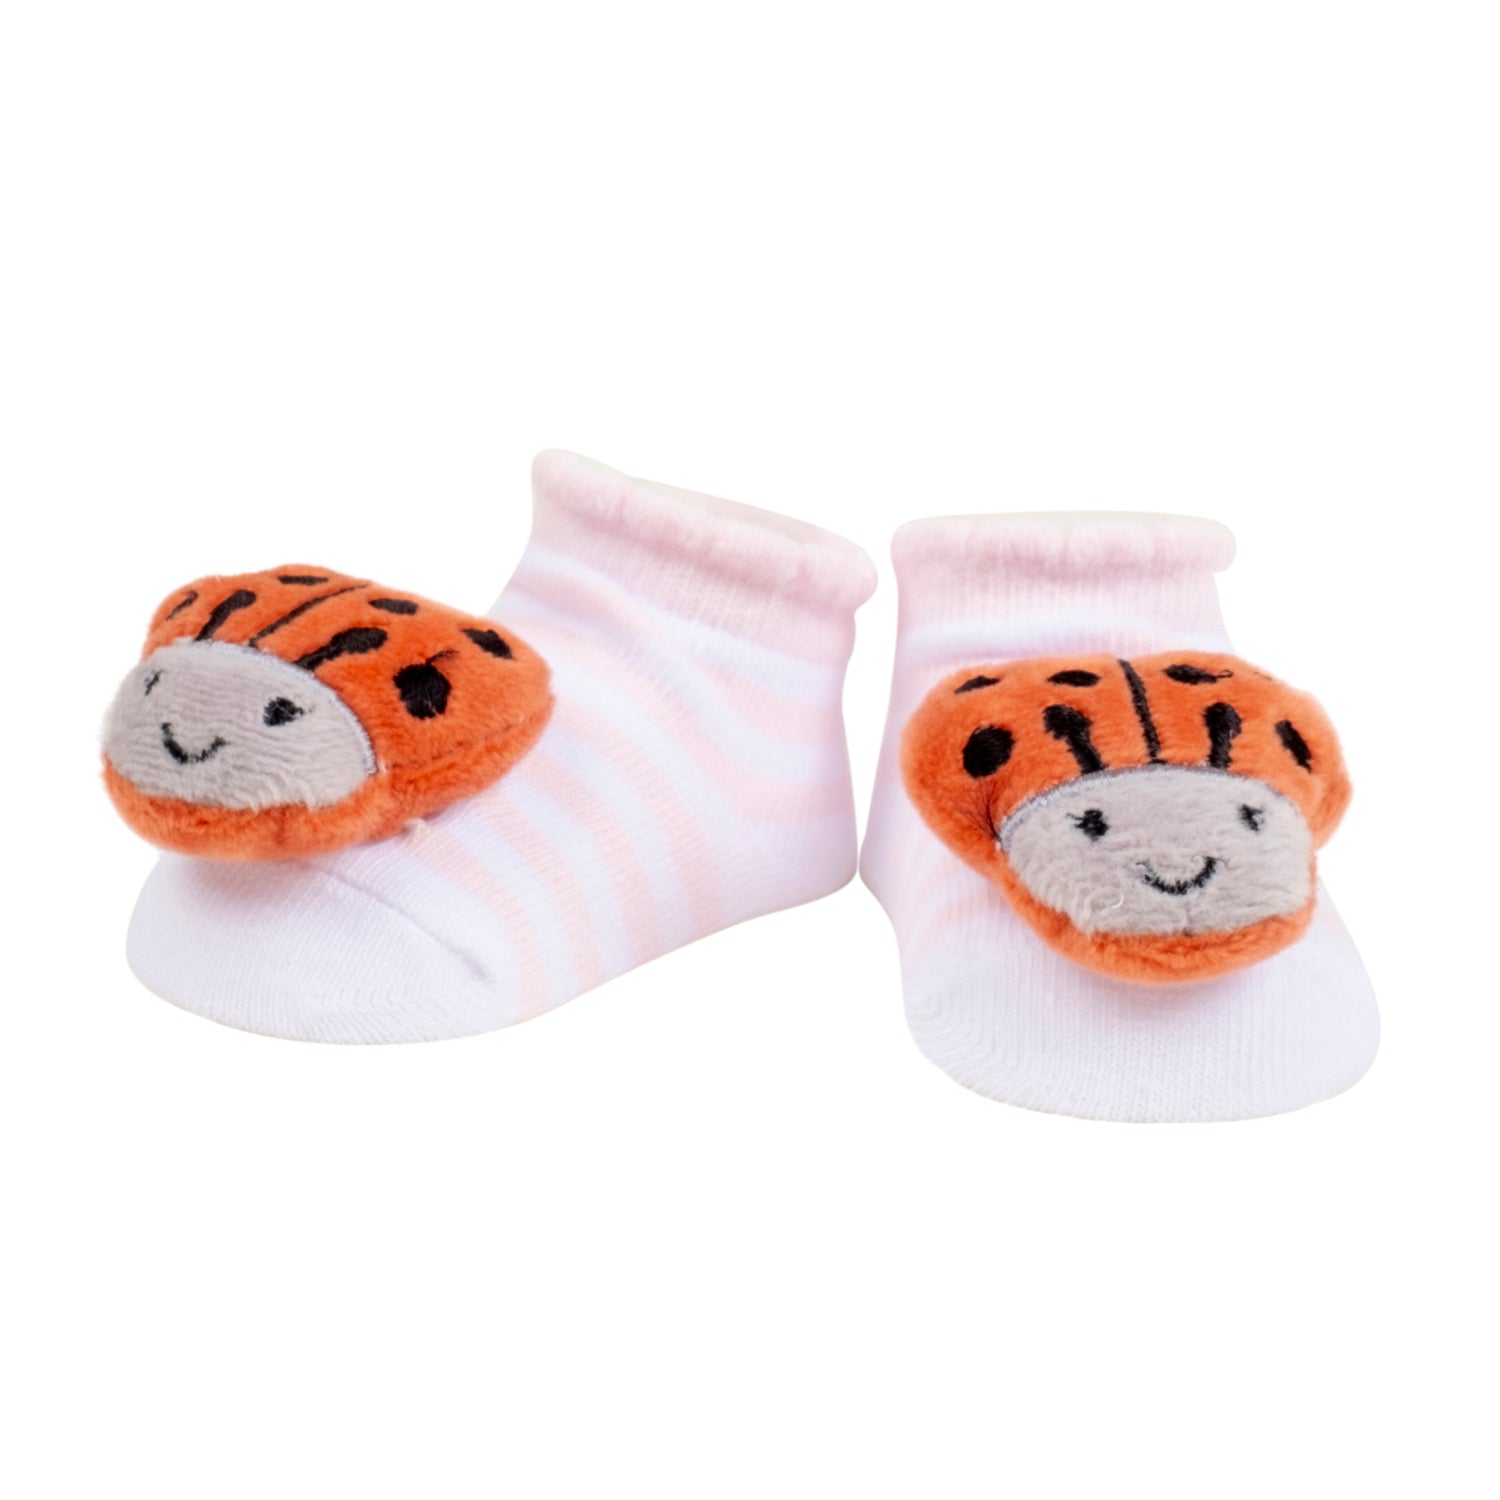 Baby Moo 3D Honey Bee Cotton Ankle Length Fancy Infant Gift Set of 2 Socks Booties - Pink, White